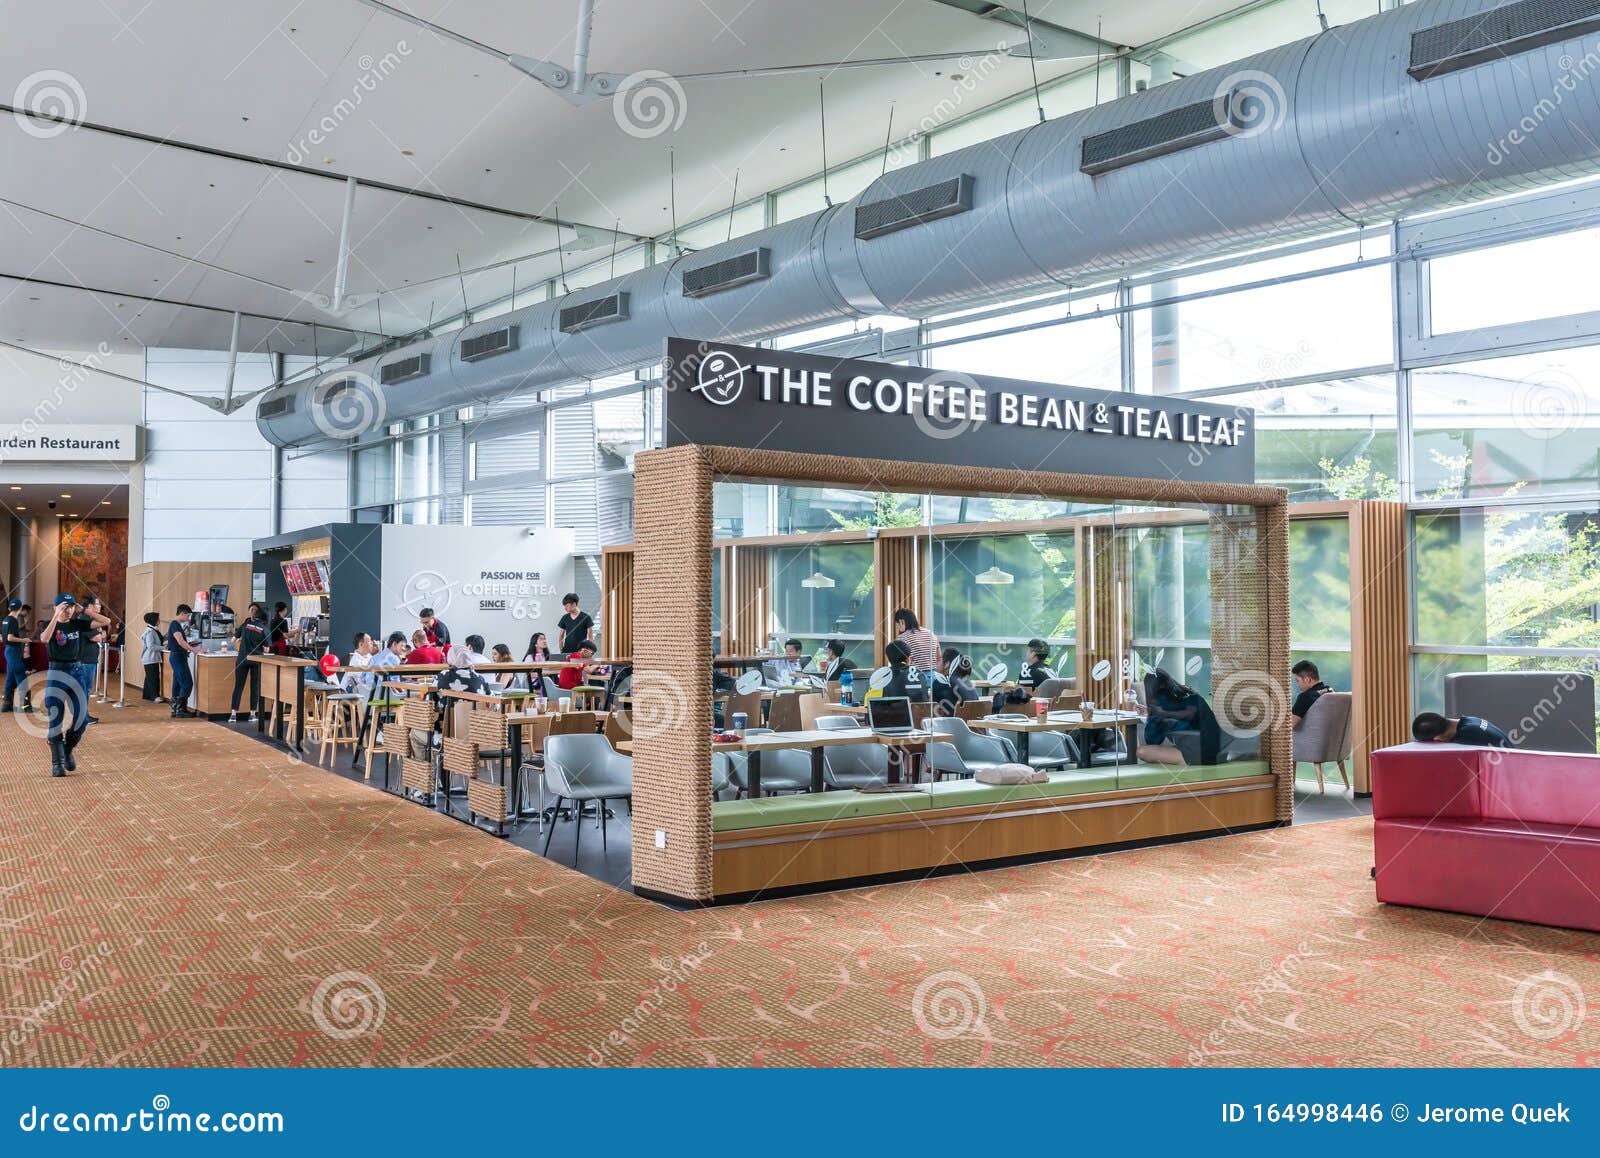 The Coffee Bean & Tea Leaf CBTL Franchise Cafe Store in Singapore Expo